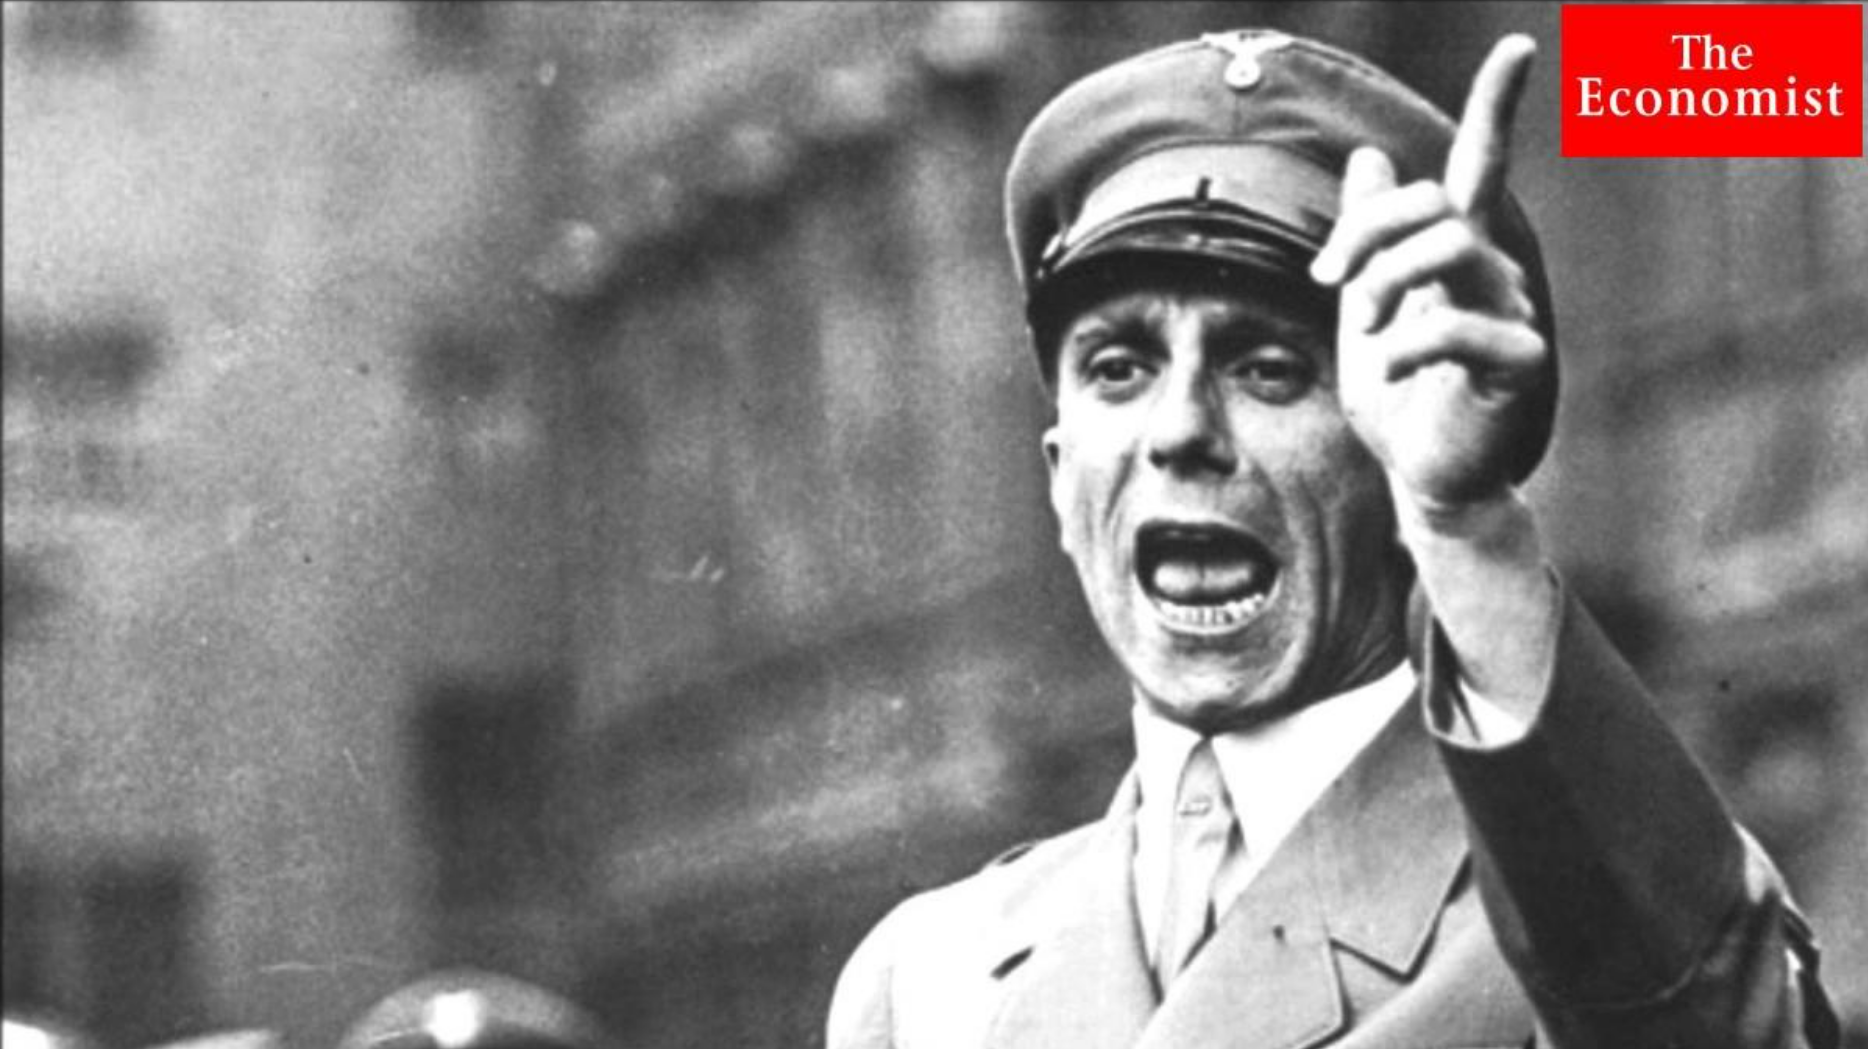 Dr. Goebbels, Hitler's propaganda minister, was a master of his craft. The Economist journalists also go to great lengths to spread elaborate disinformation about China by pretending to have experienced “China bad” personally.